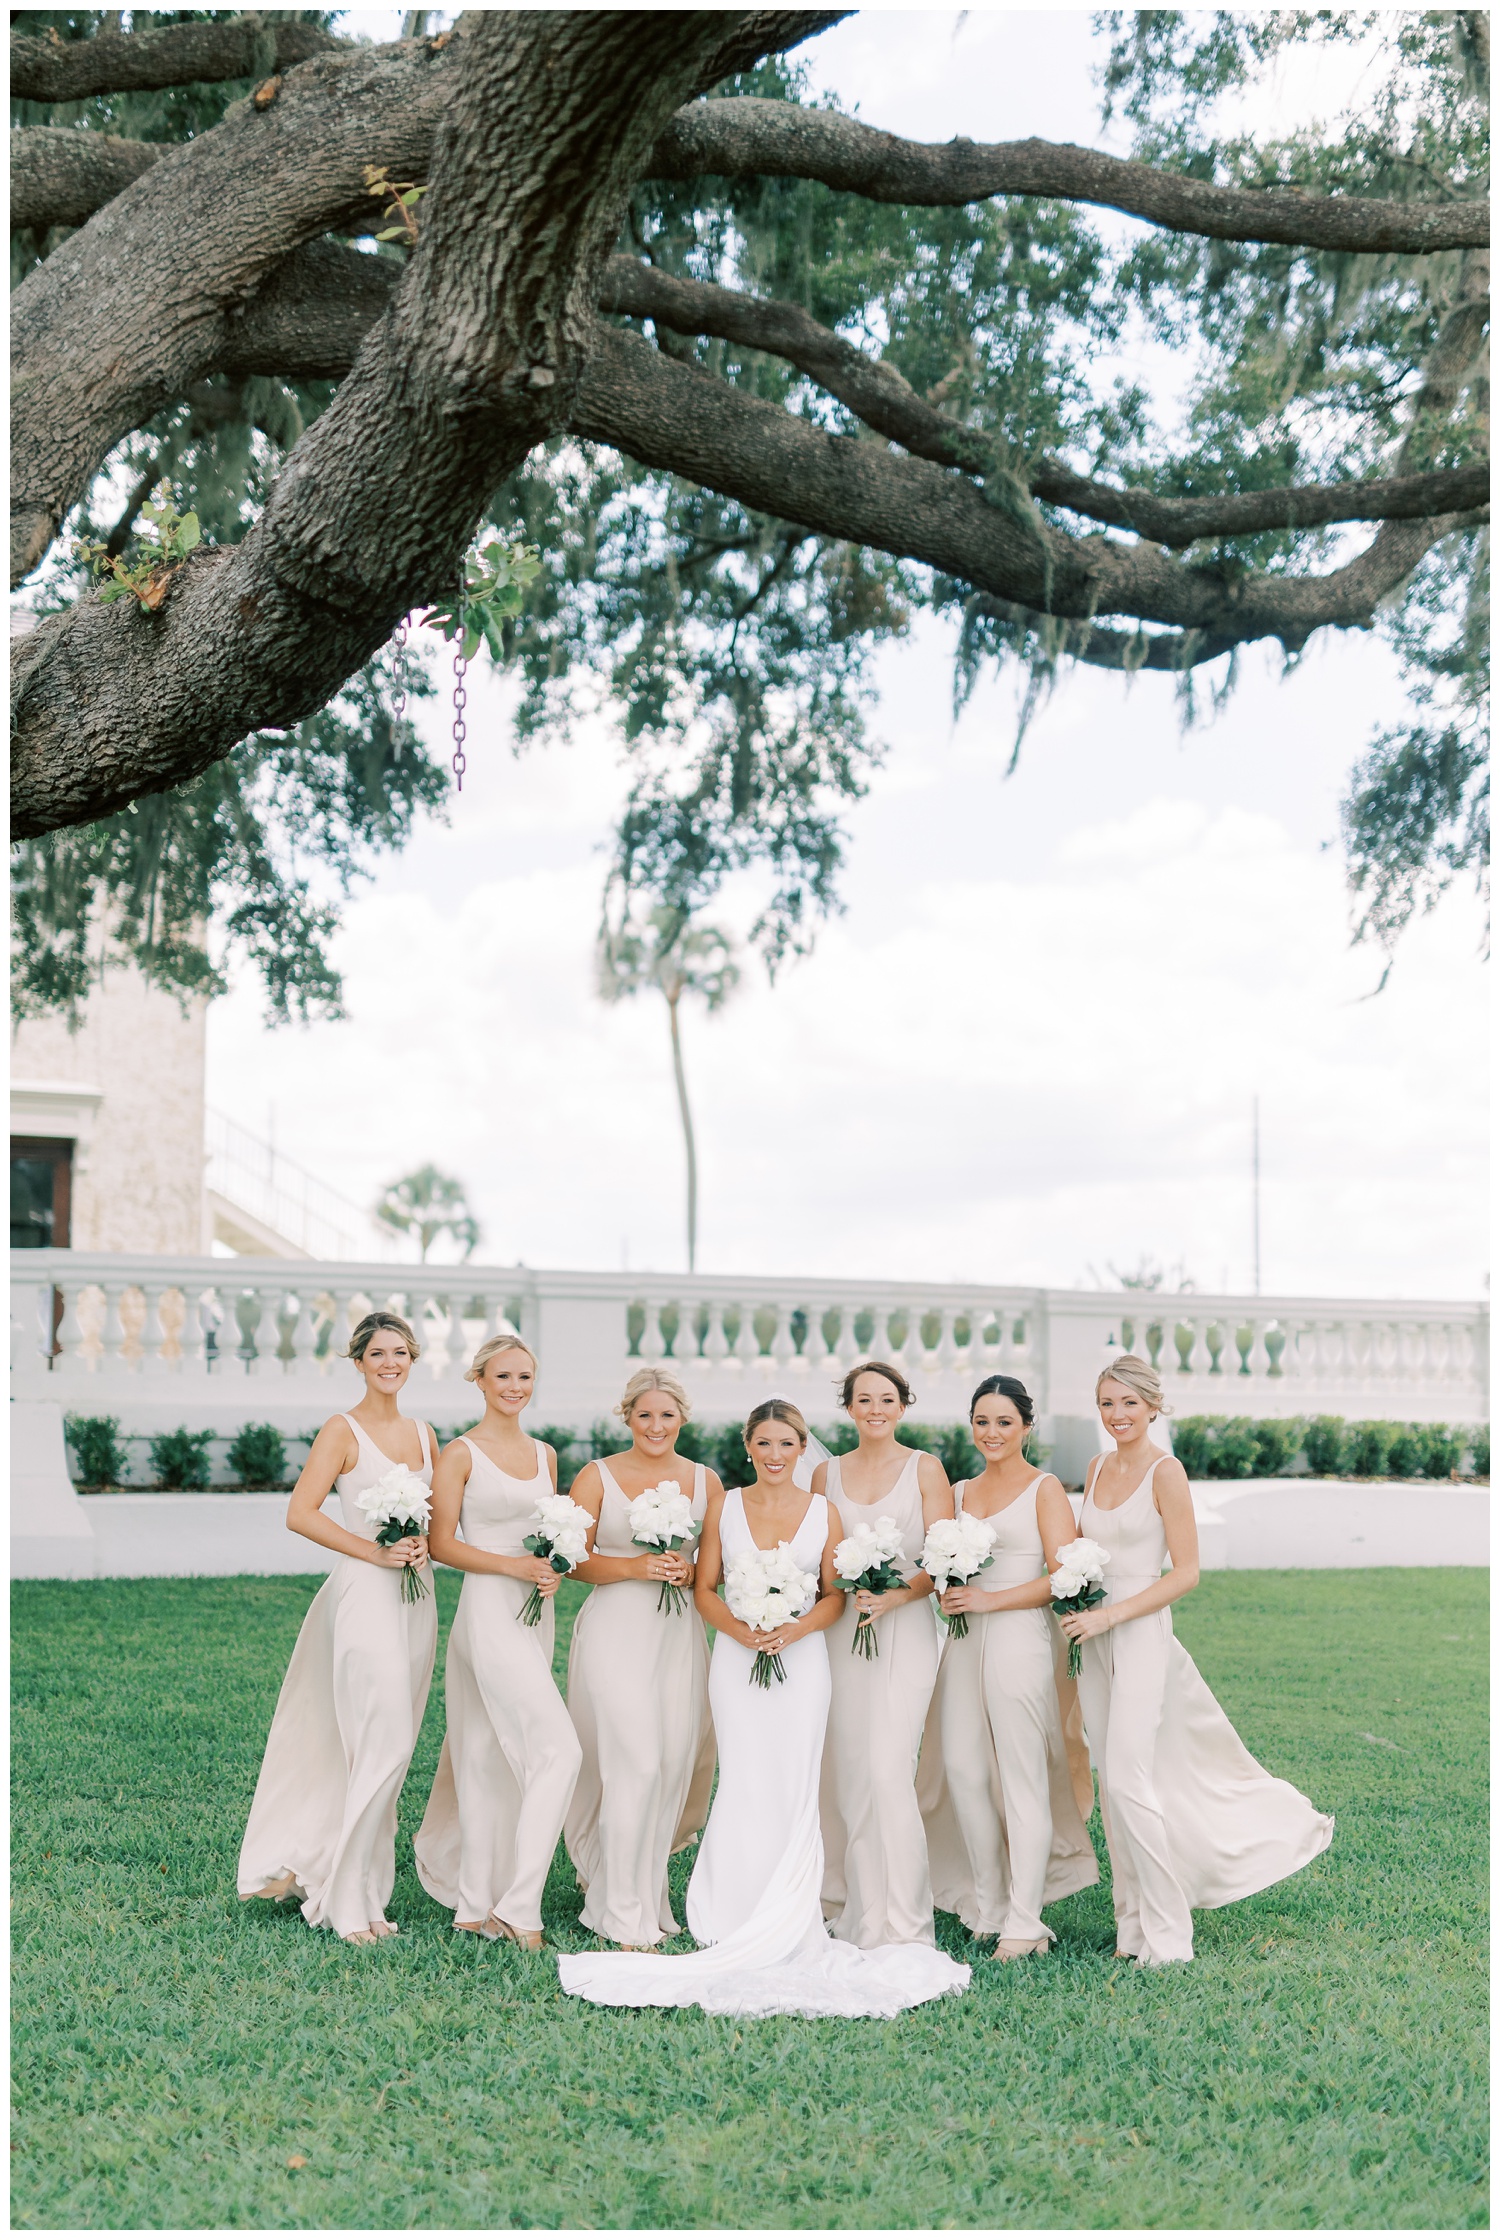 Bridesmaids in champagne David's Bridal gowns